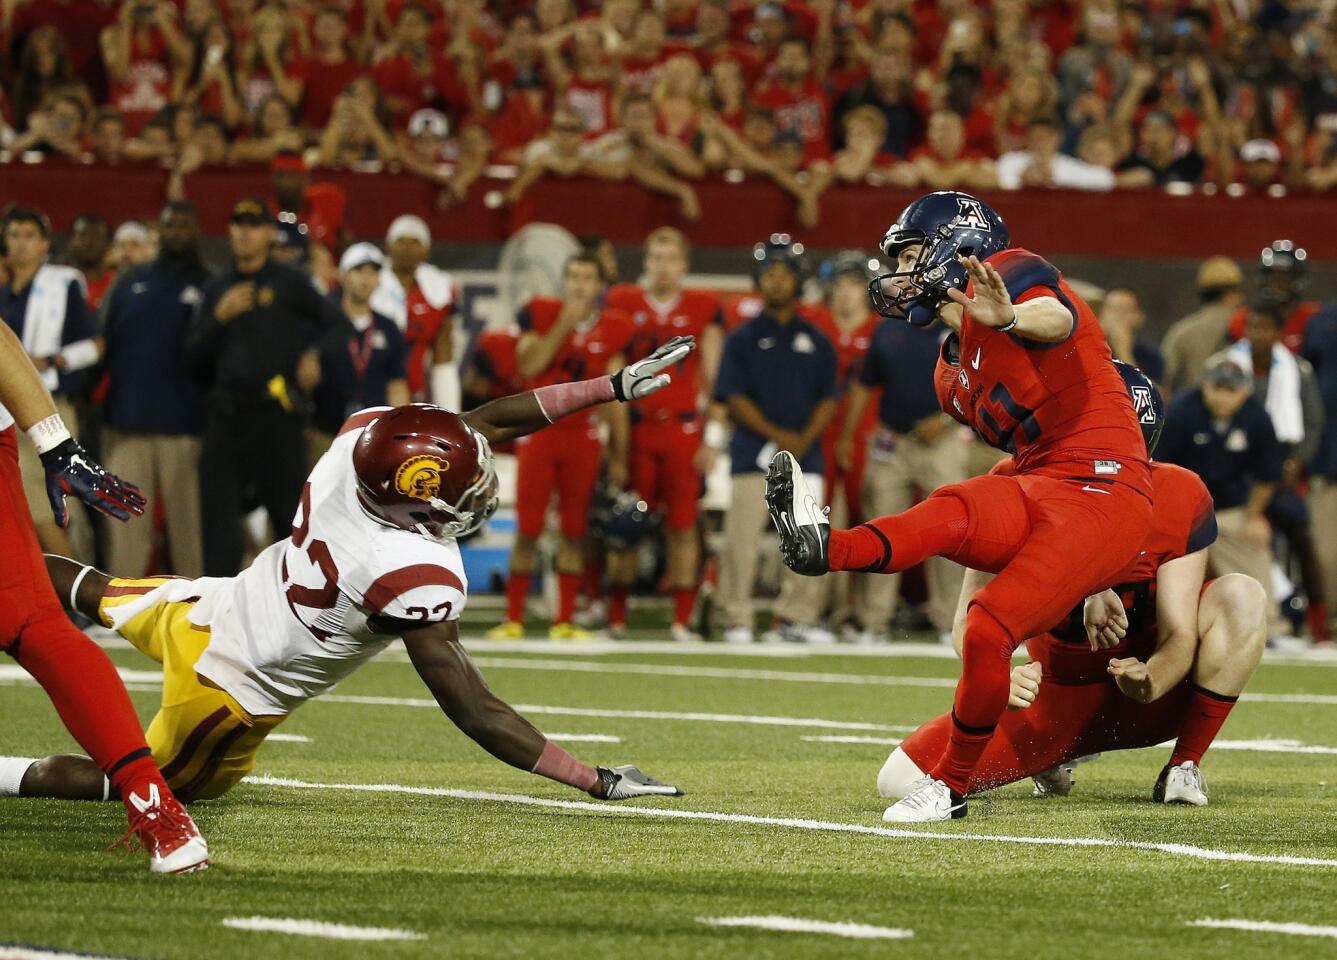 Arizona kicker Casey Skowron misses a 36-yard field-goal attempt in front of USC safety Leon McQuay in the closing seconds of the Trojans' 28-26 victory Saturday.